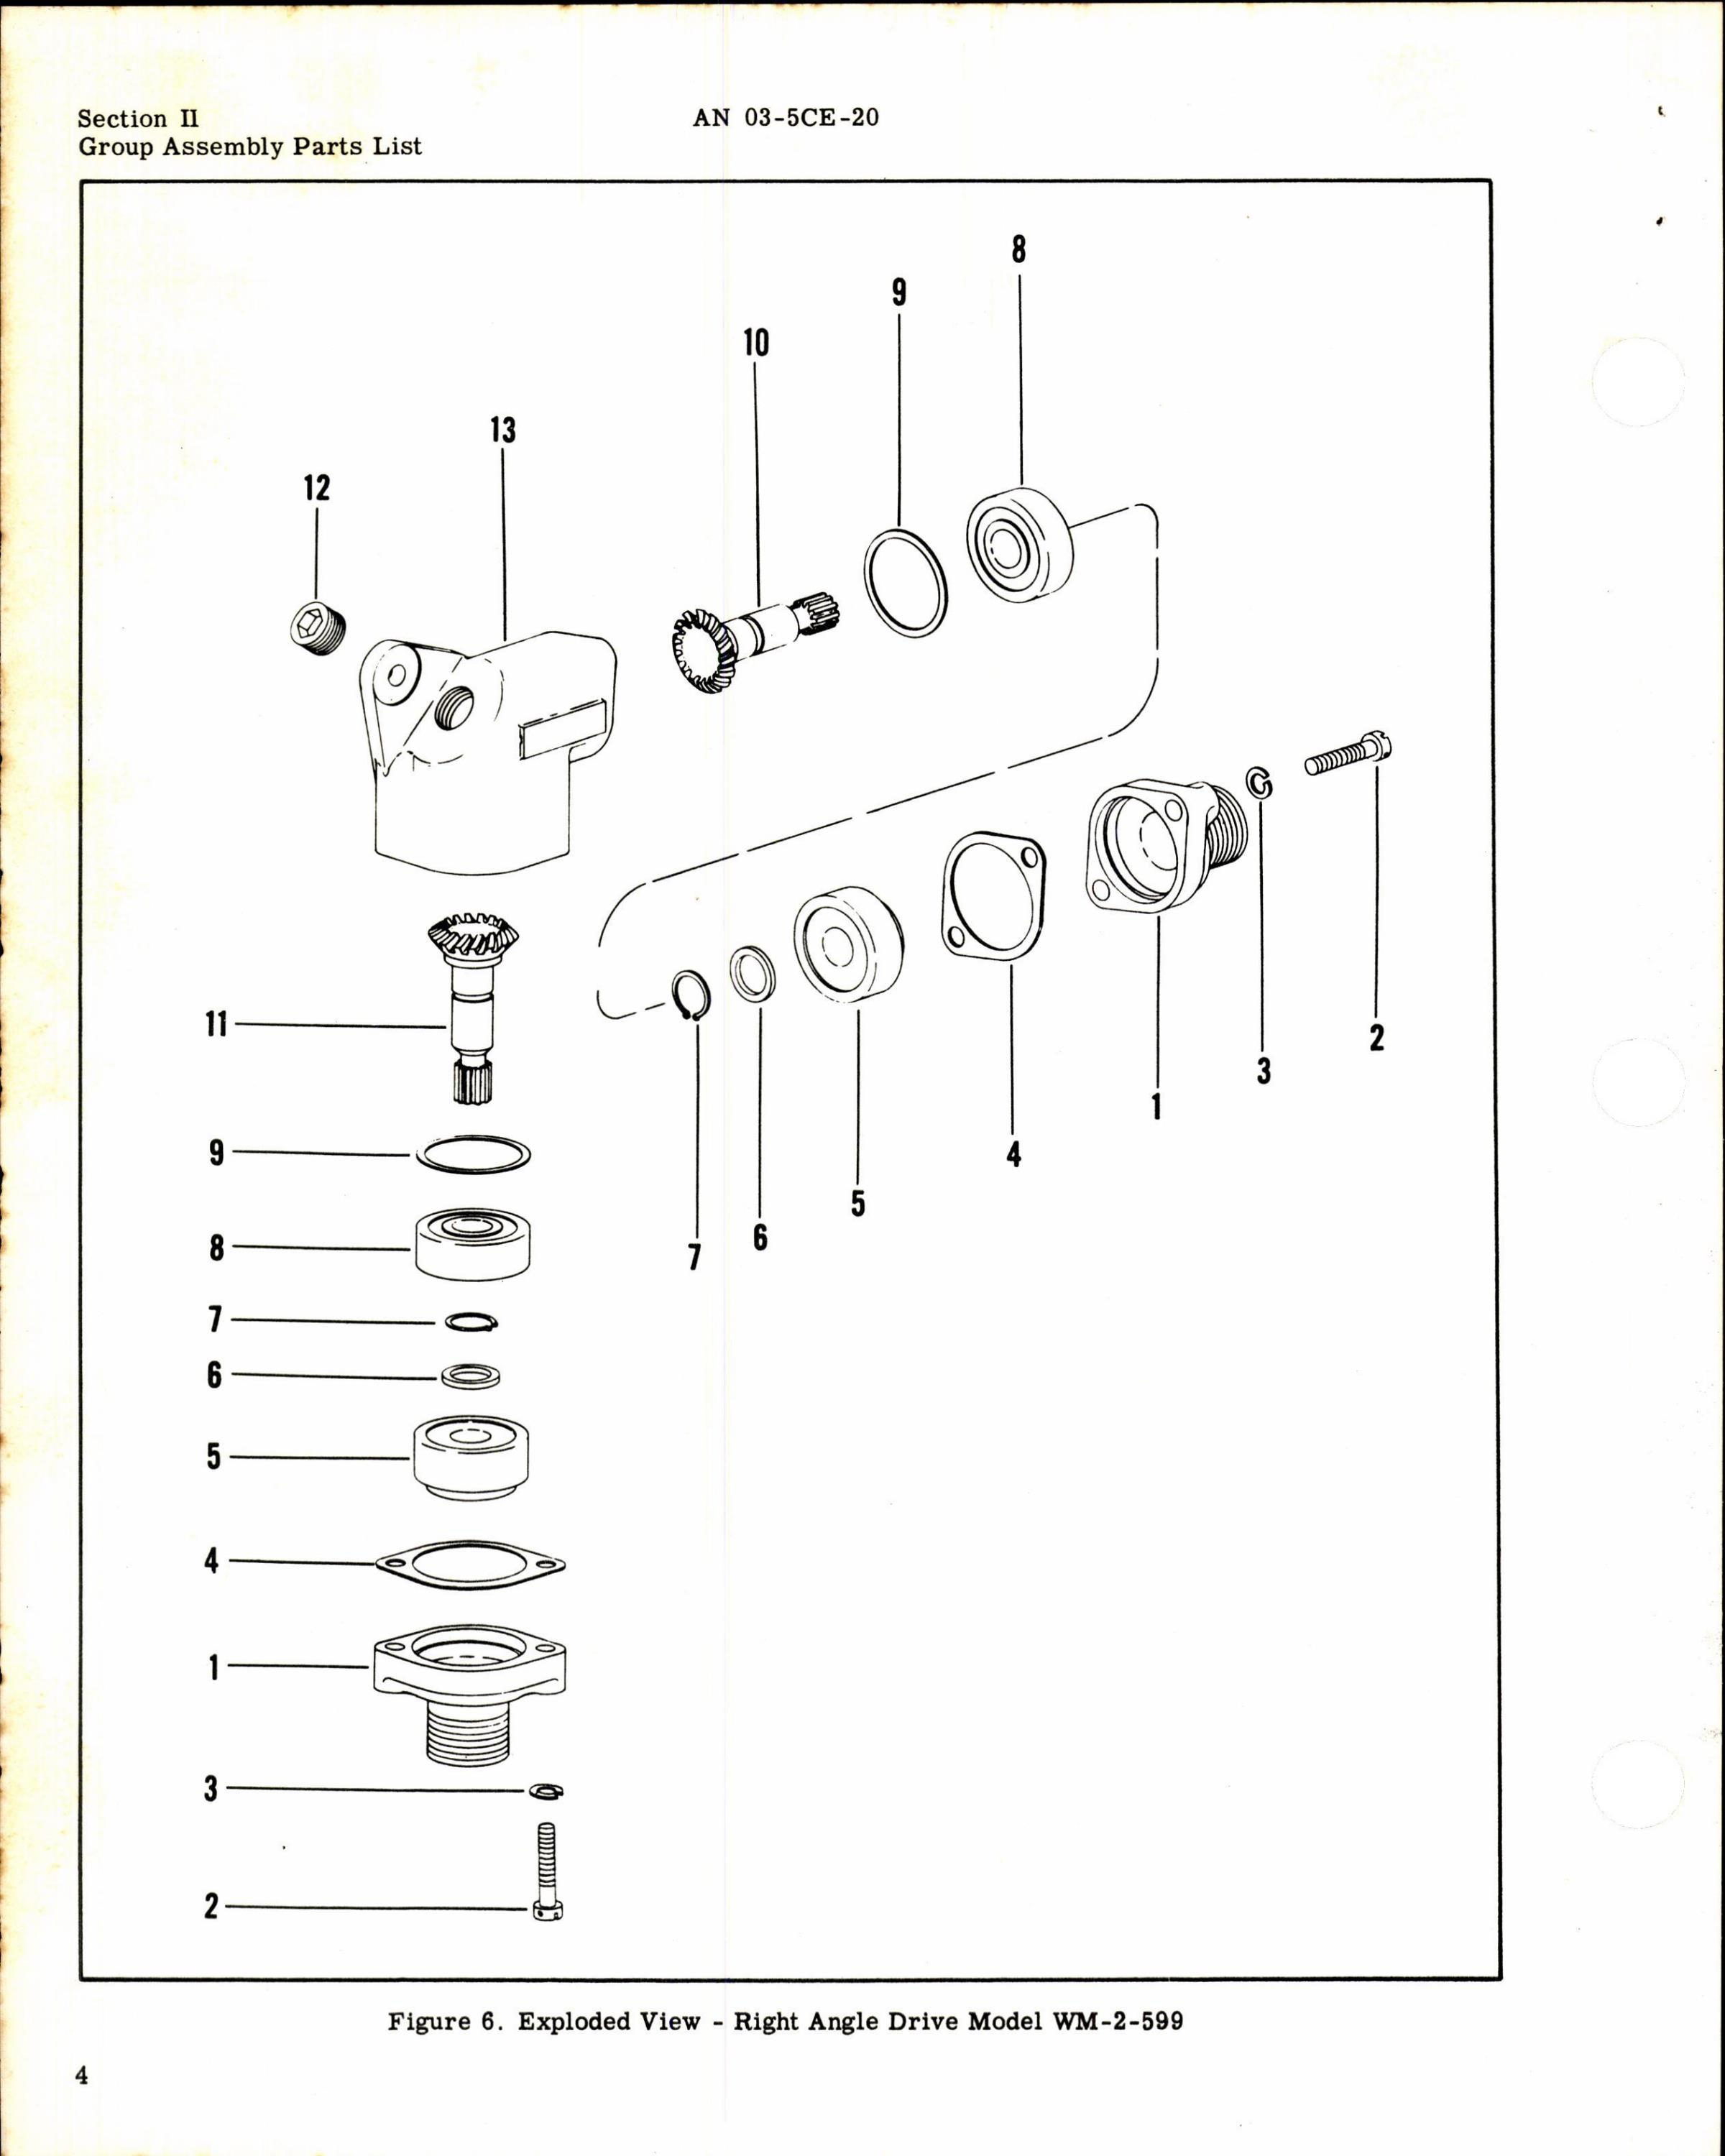 Sample page 8 from AirCorps Library document: Parts Catalog for Air Associates Gear Box and Drive Assemblies